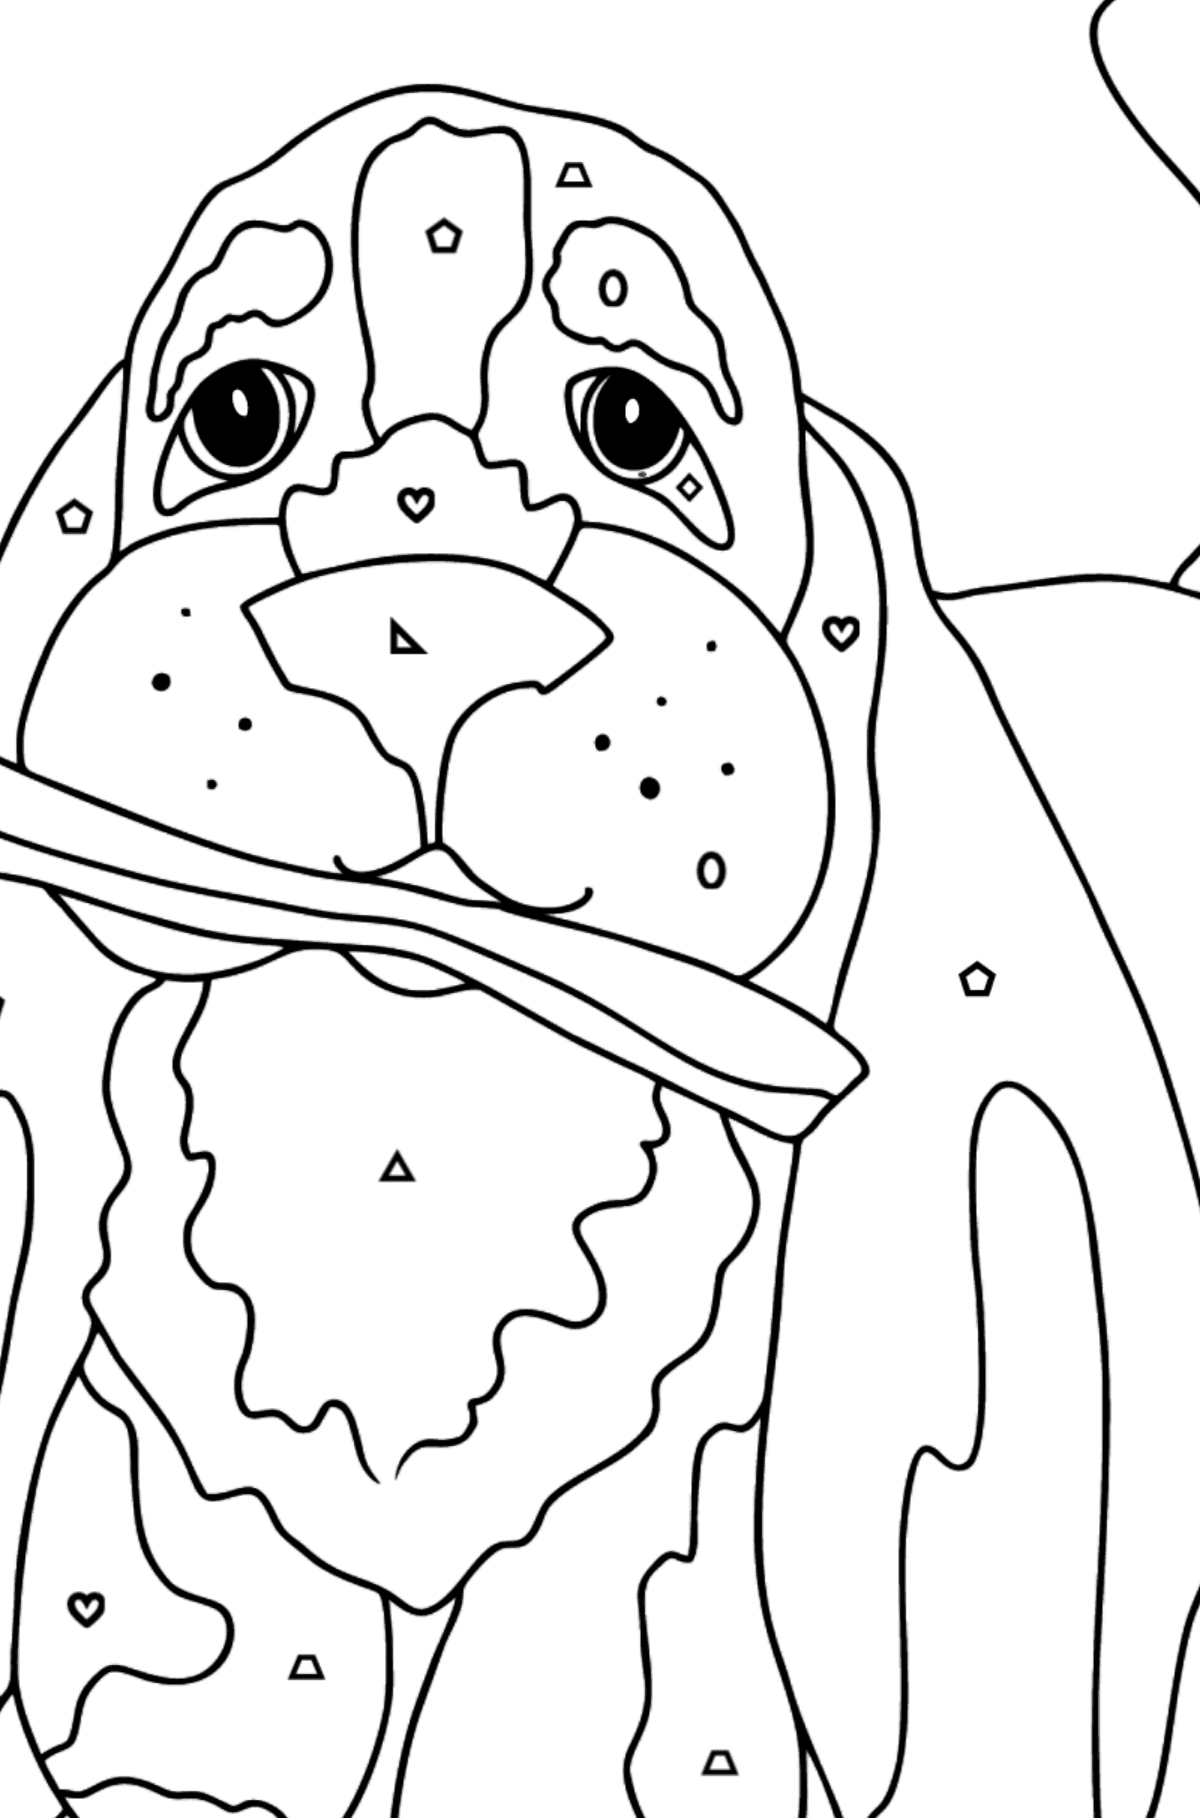 Coloring Page - A Dog is Waiting for Its Owner with a Stick - Coloring by Geometric Shapes for Kids